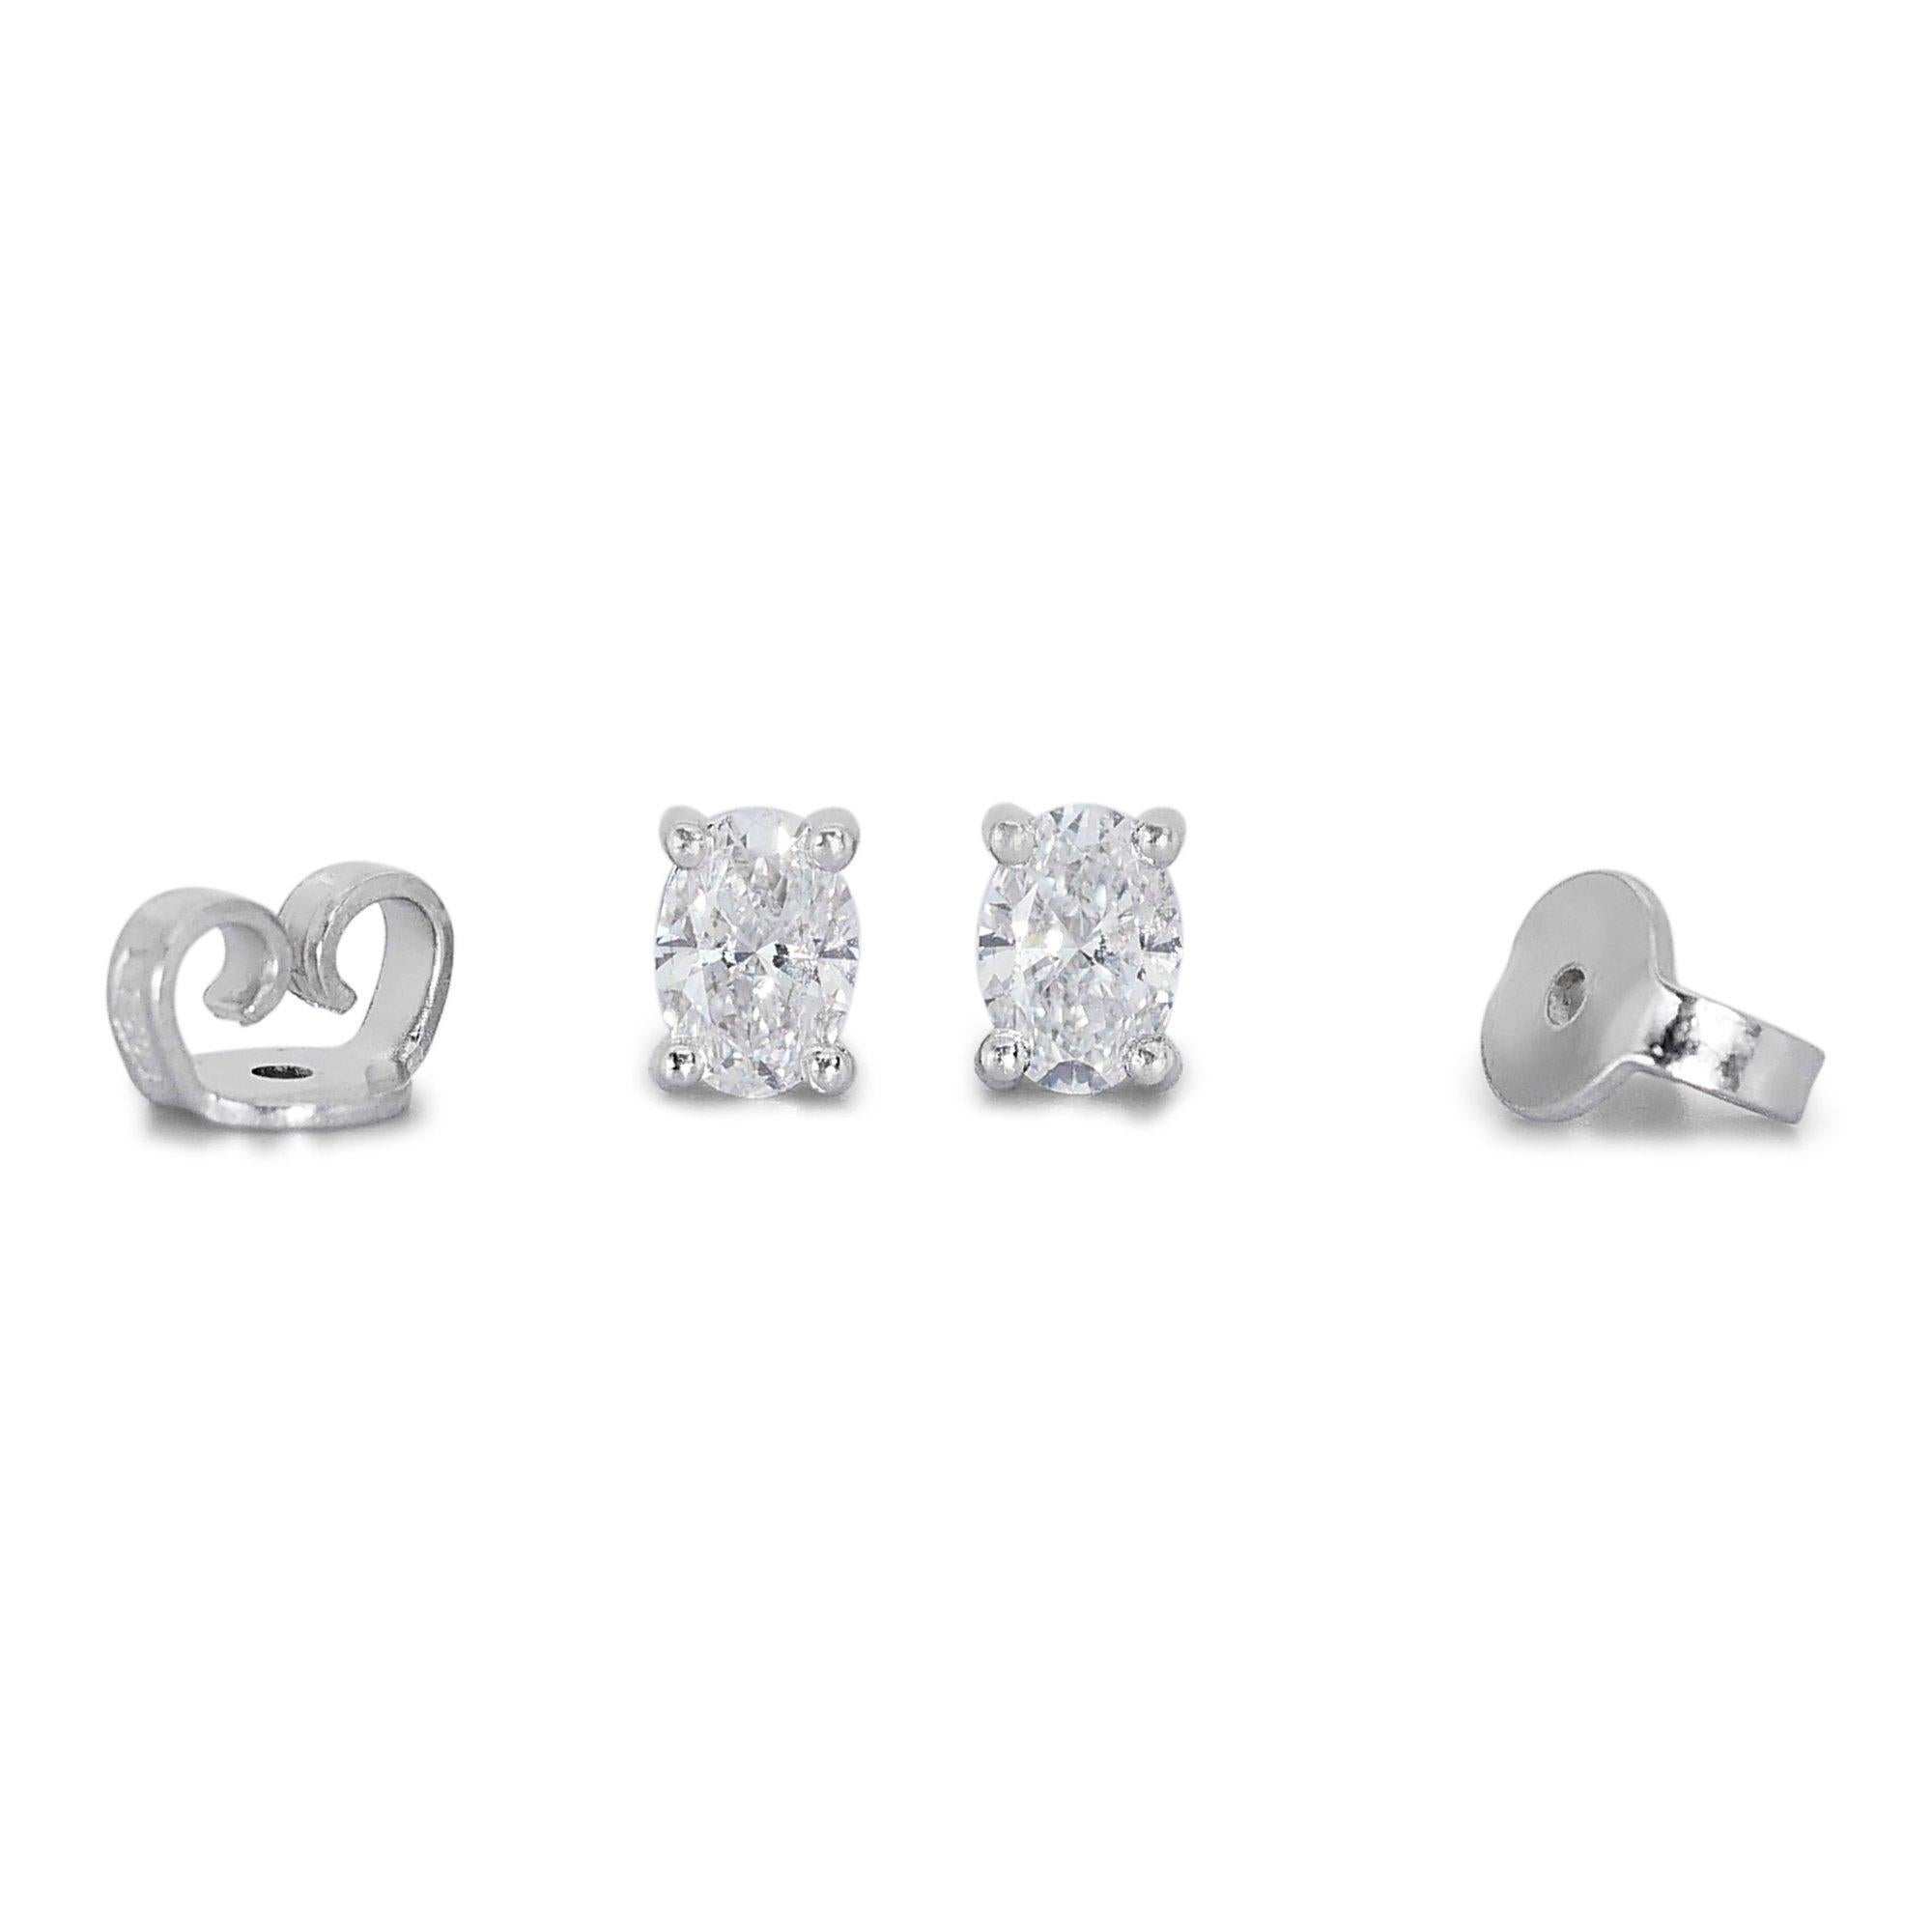 Exquisite 1.40ct Oval Diamond Stud Earrings in 18k White Gold - GIA Certified For Sale 3